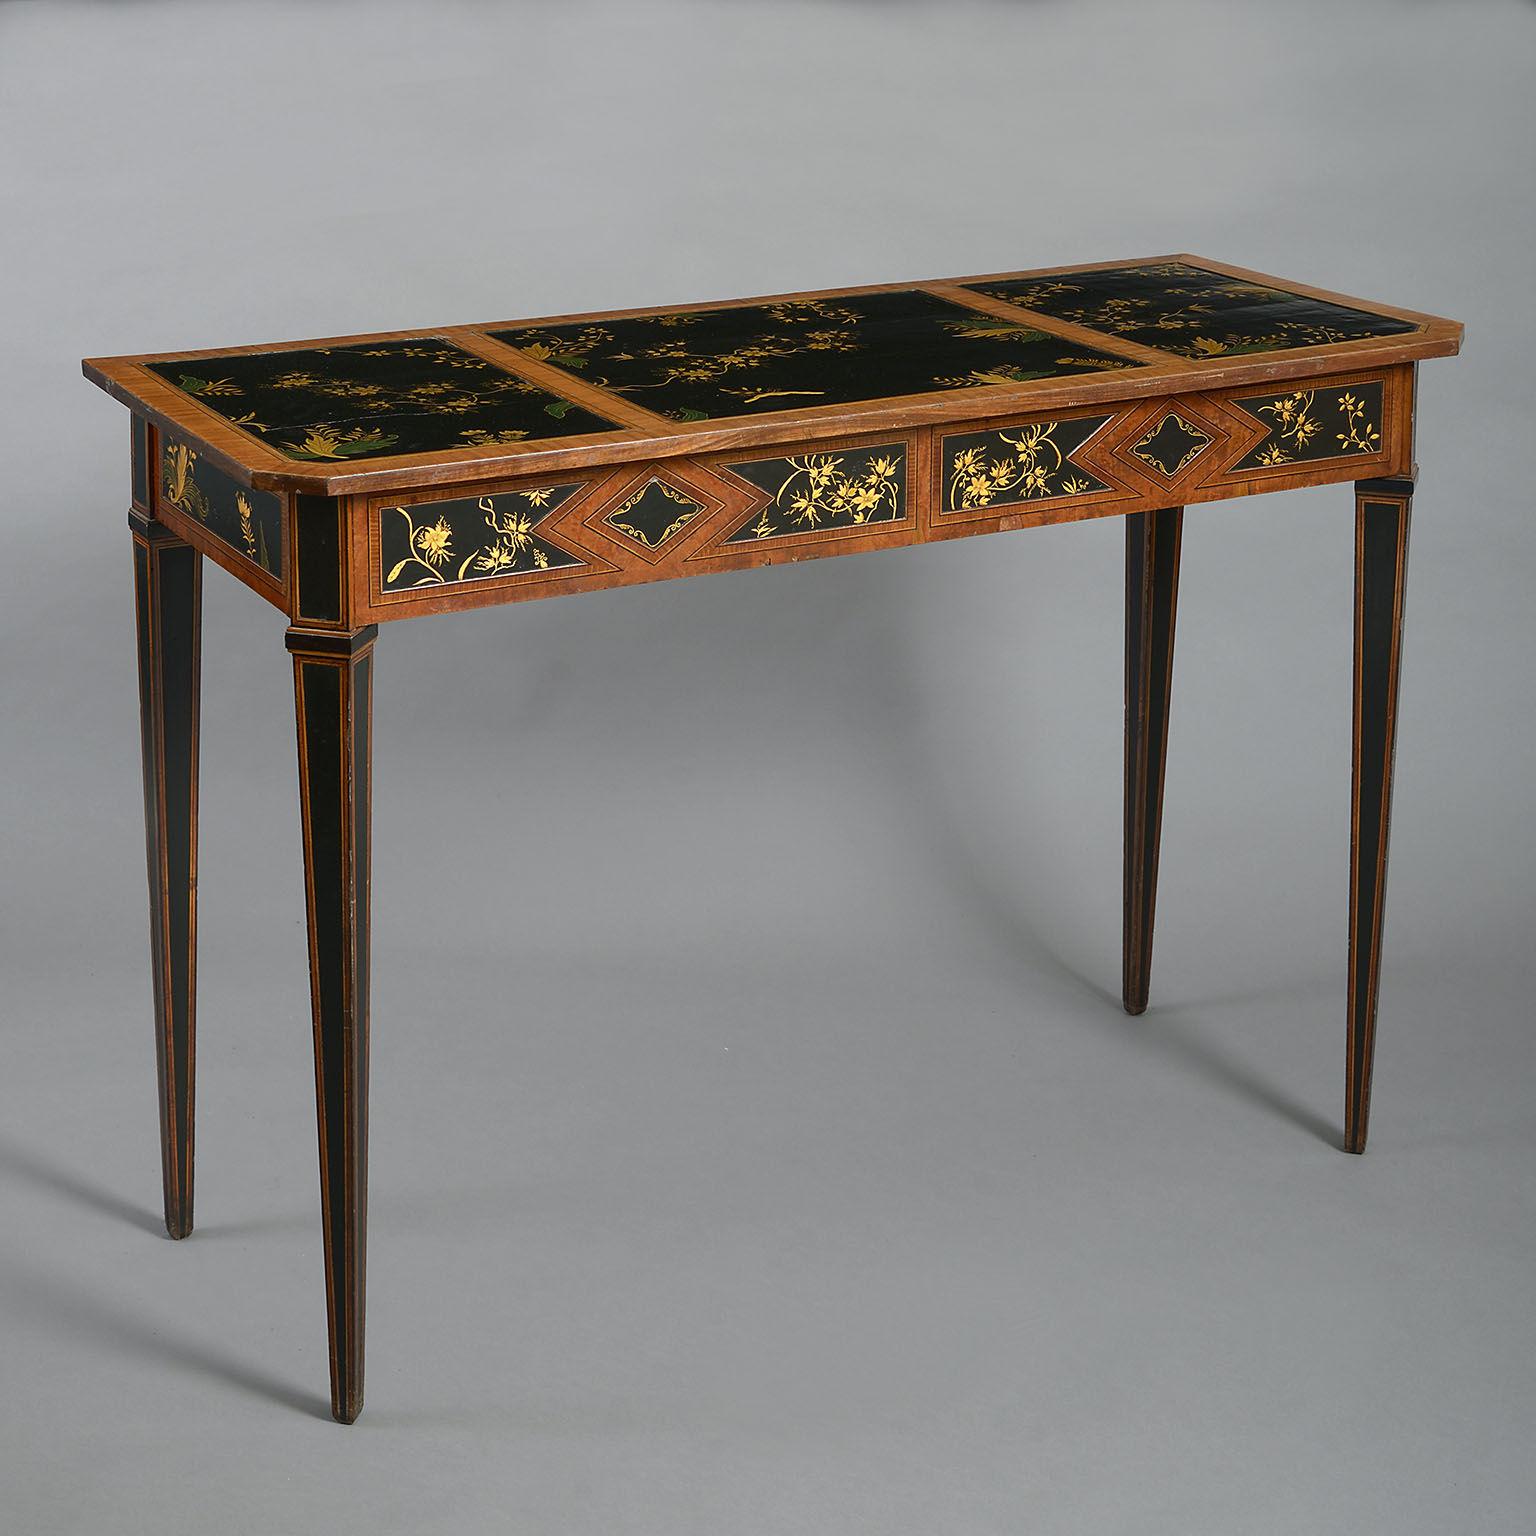 The canted top inset with three fine gilt-decorated lacquer panels between cross-banded borders, above a frieze with further lacquer panels, raised on angled square tapering legs.
 